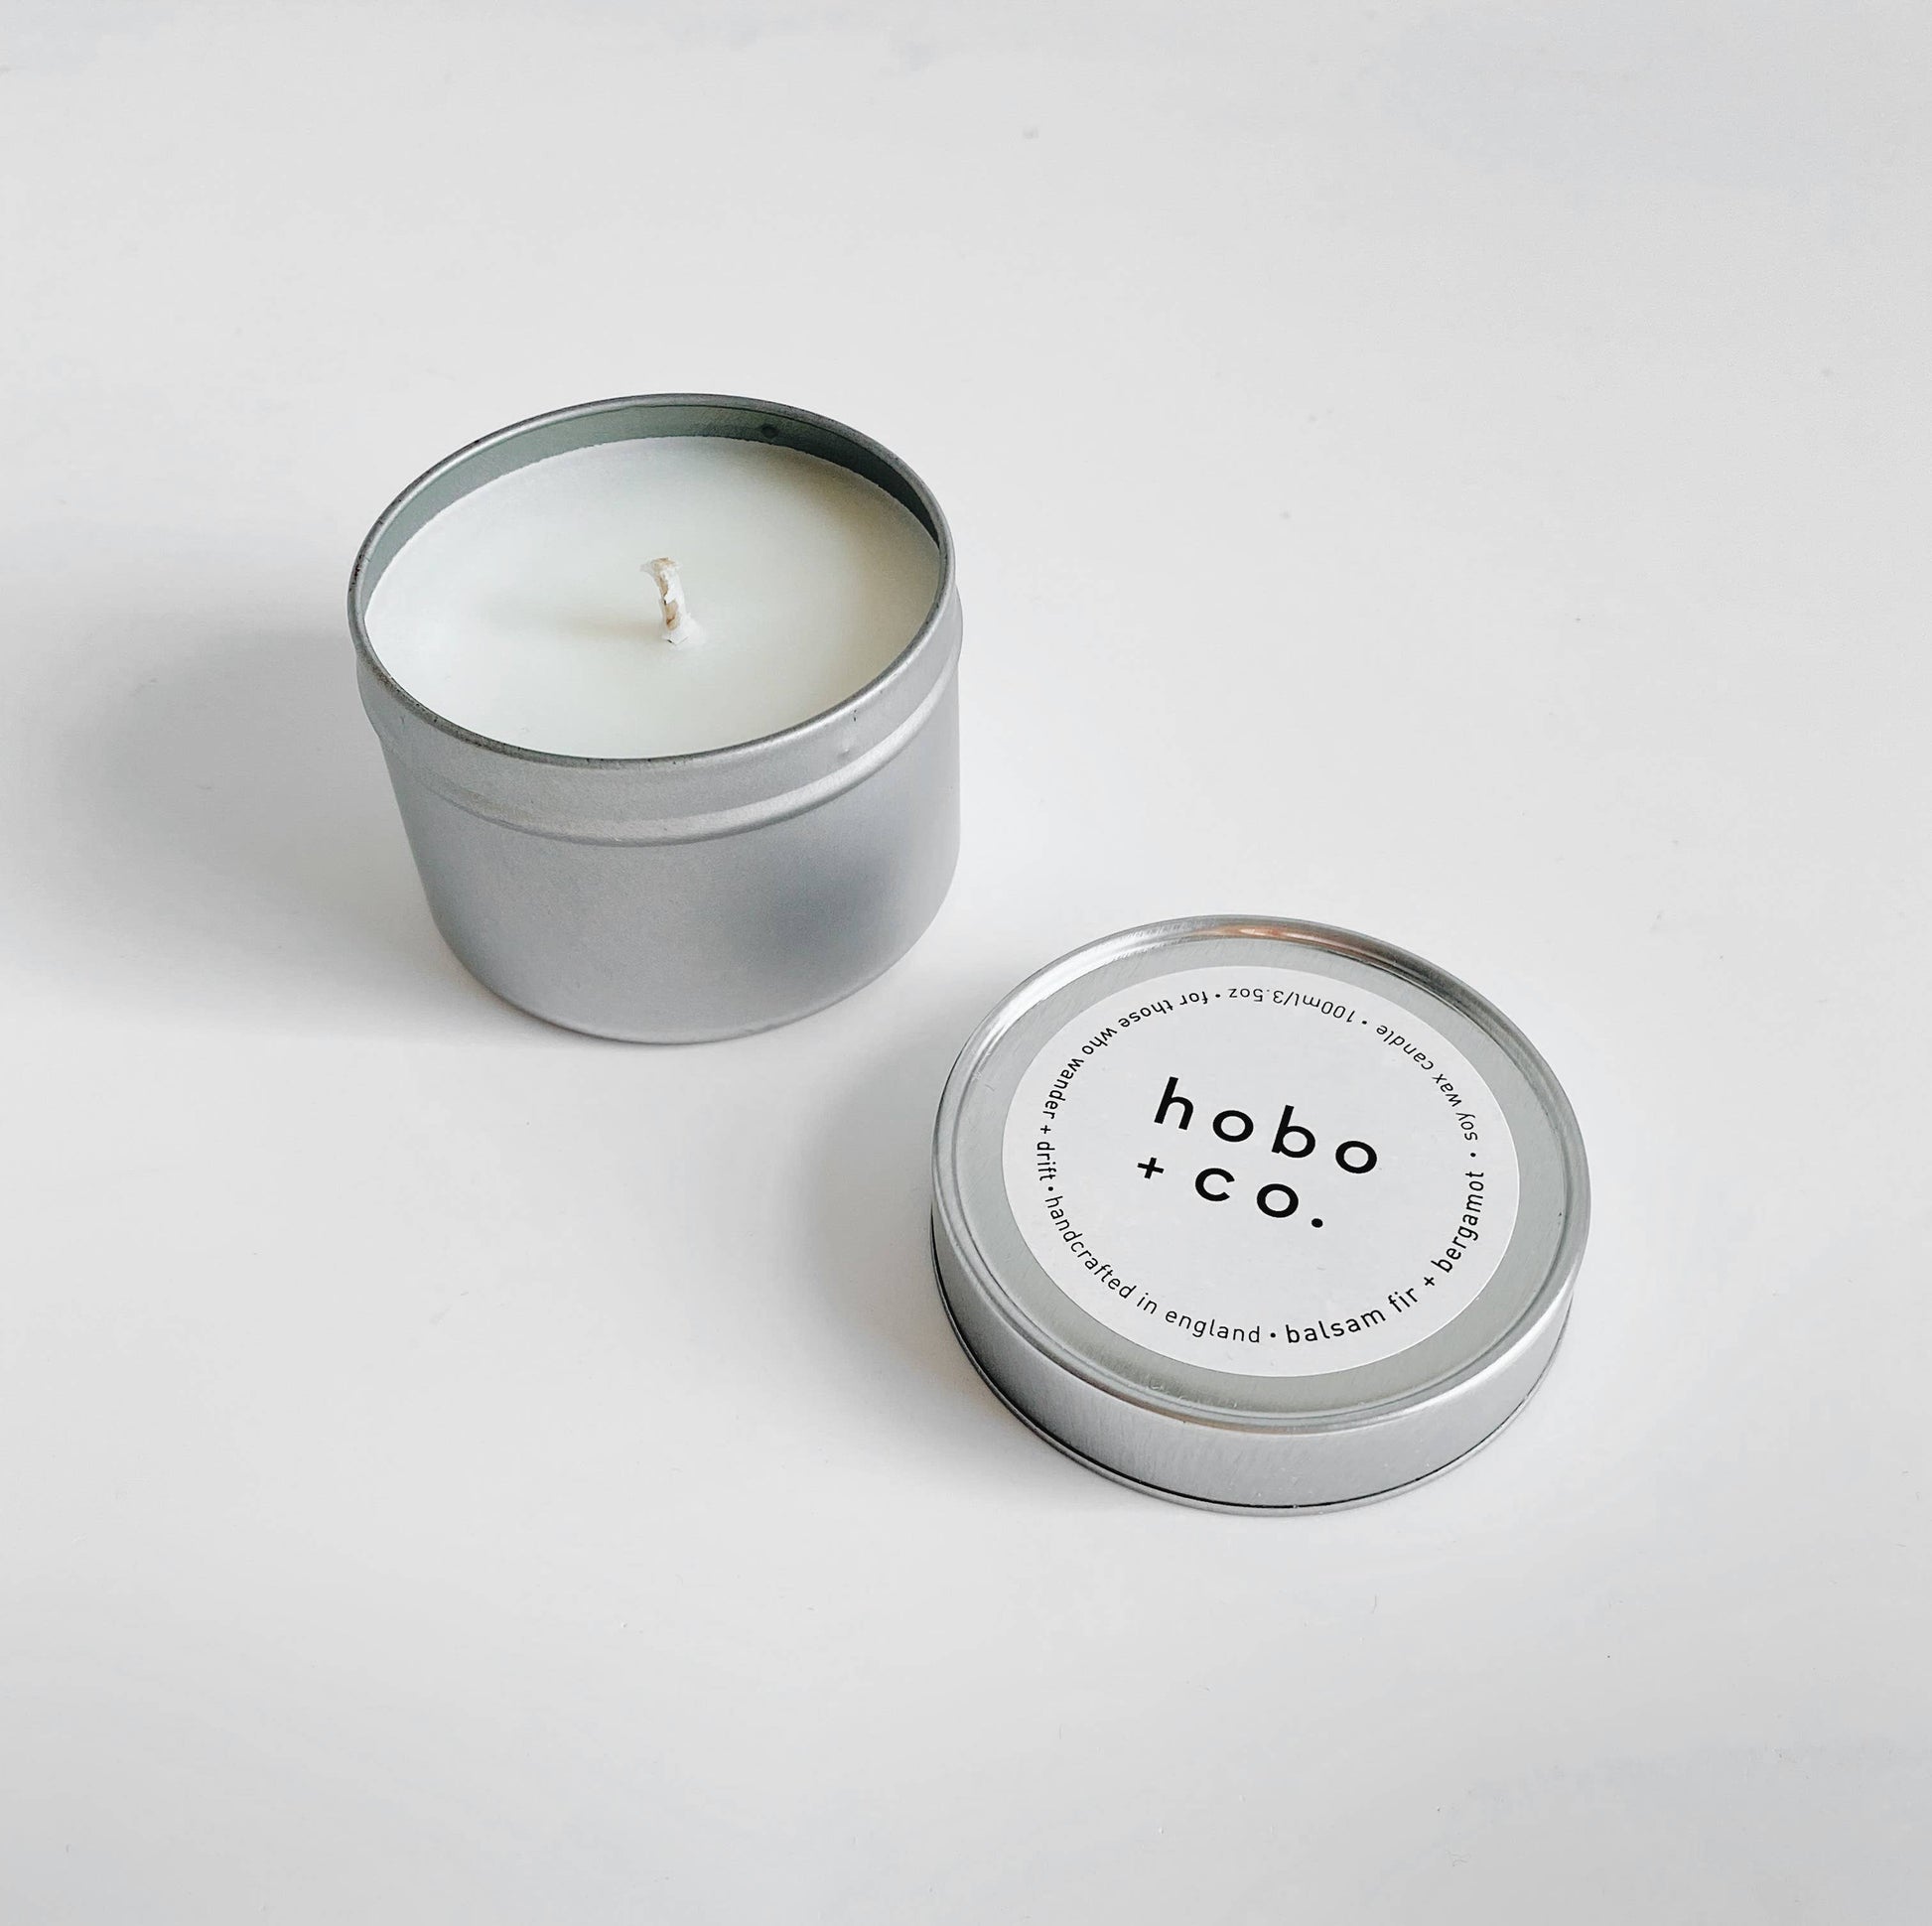 Hobo+Co Balsam Fir & Bergamot Travel Tin Soy Wax Candle at Joetie Home Fragrance. Luxury Handmade Apothecary Soy Candles